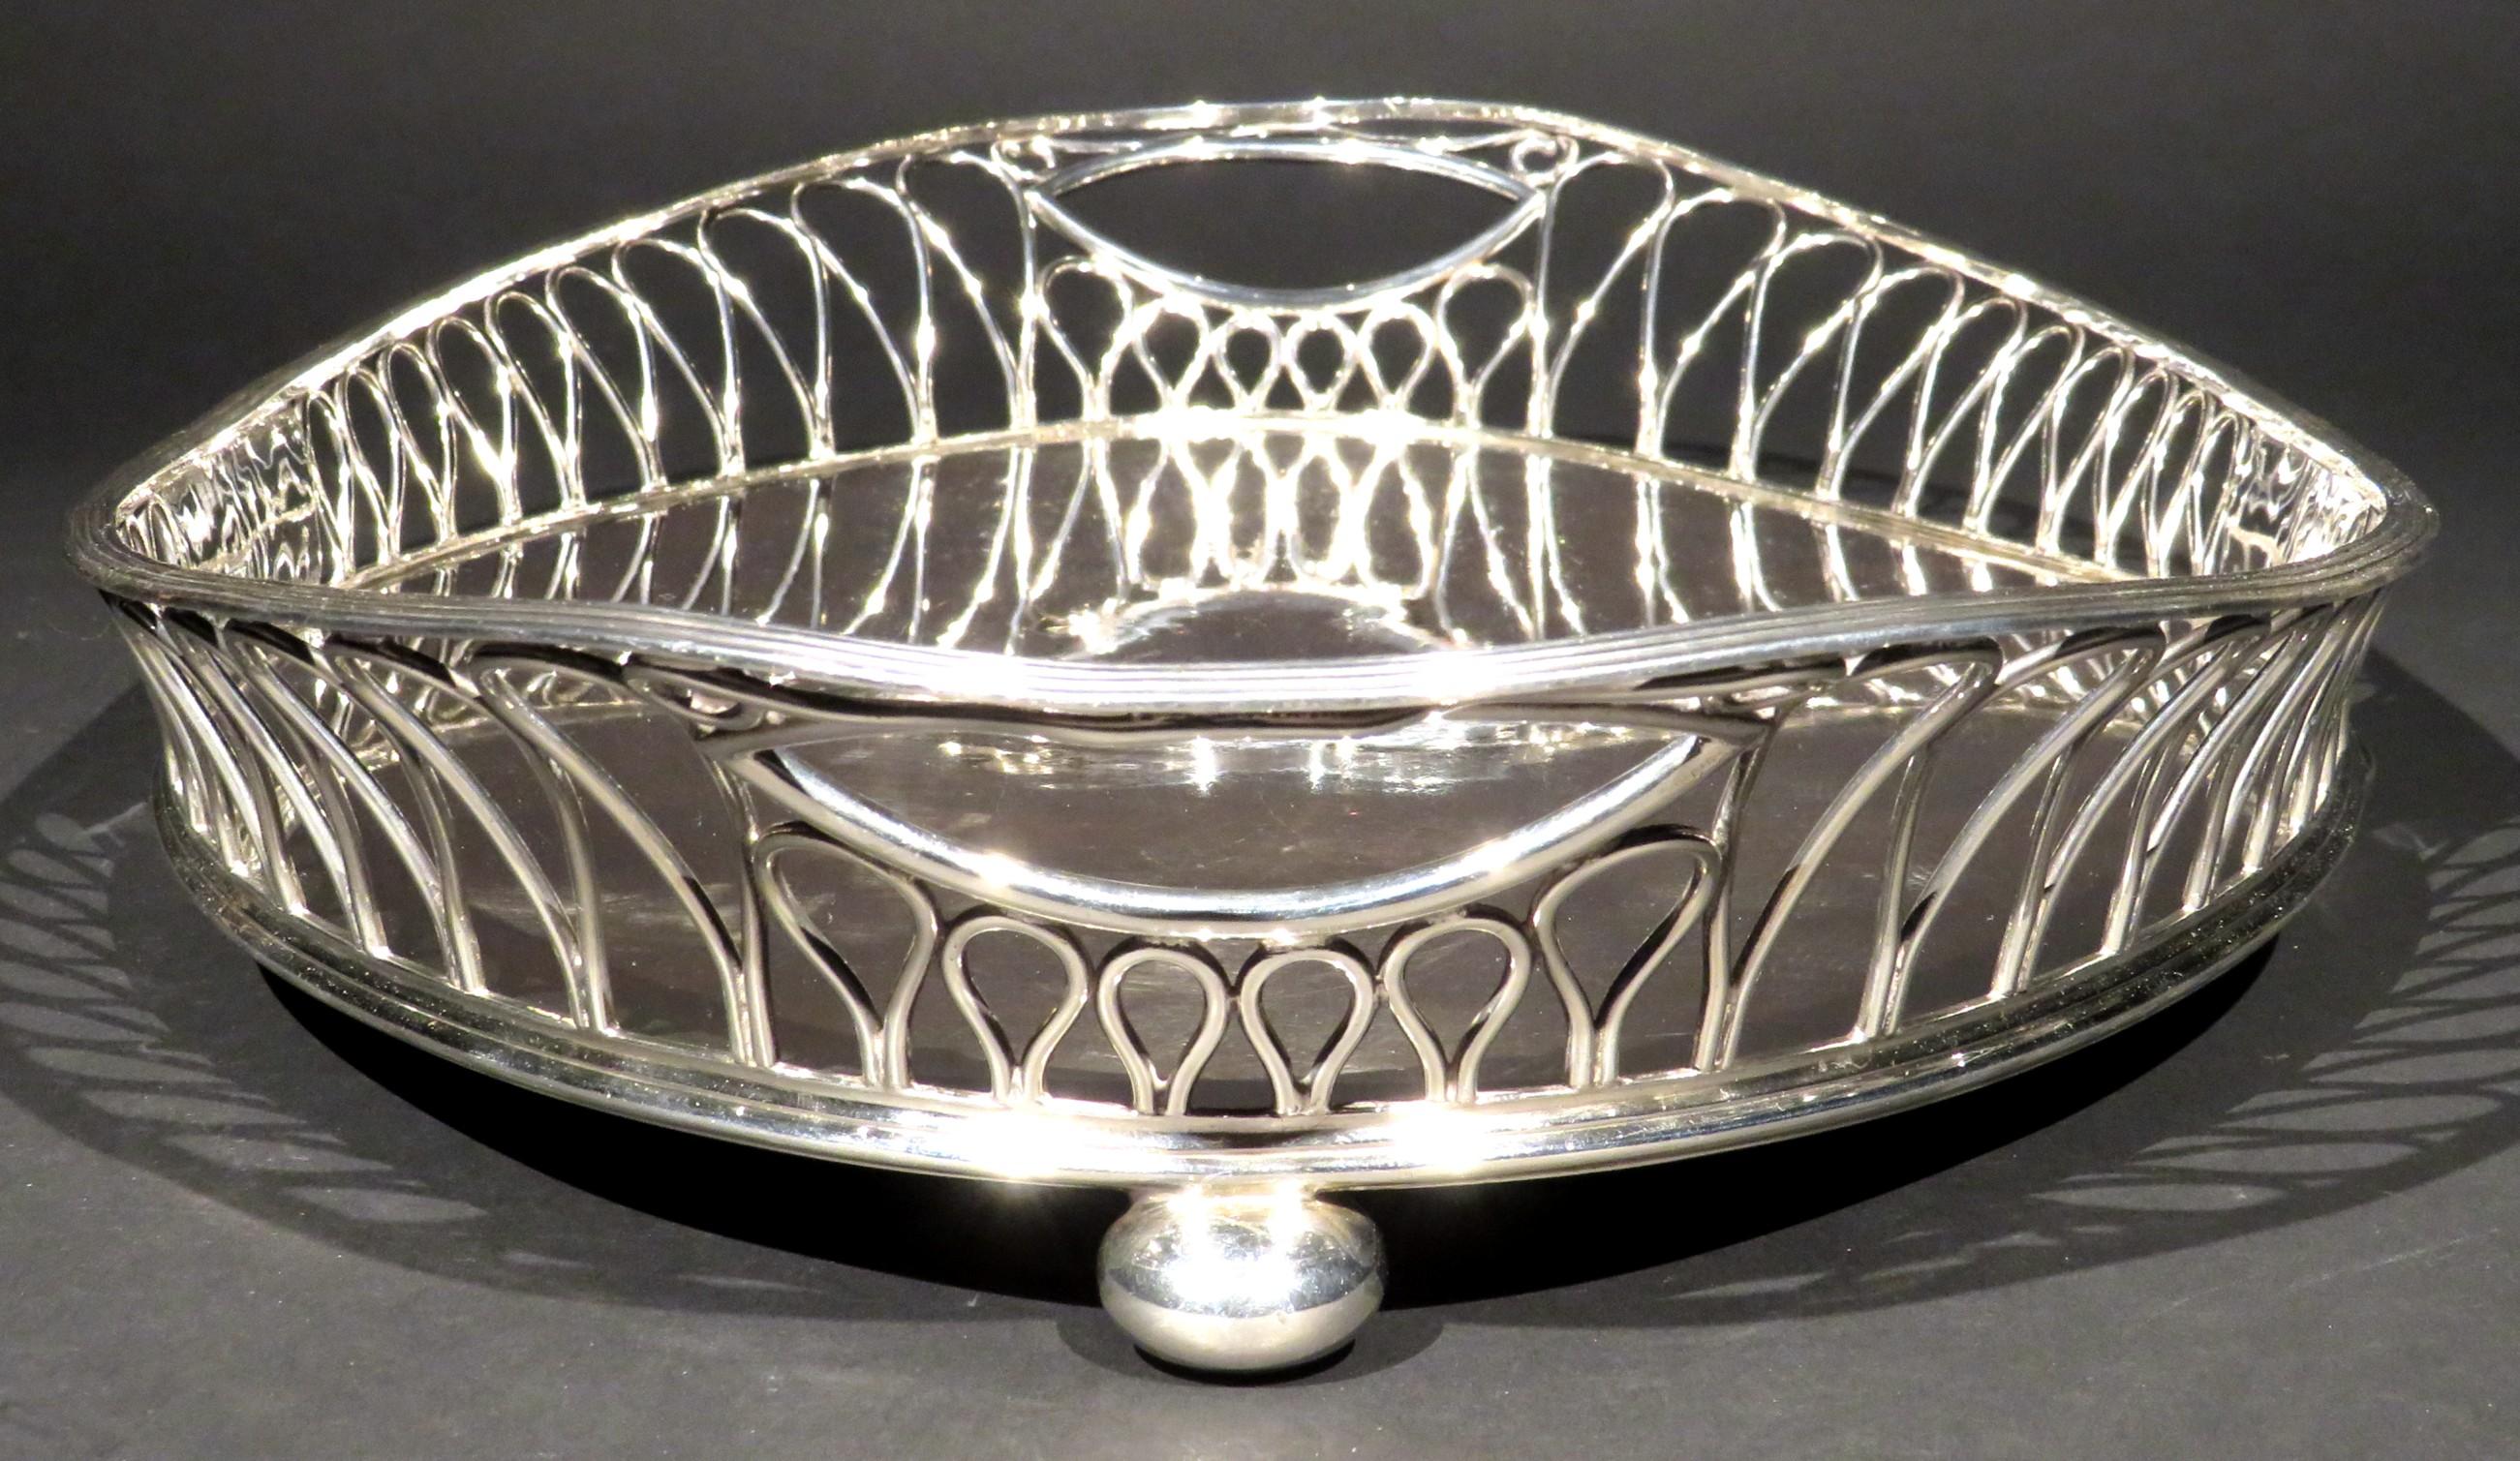 A Very Good Art Nouveau Silver Plated Gallery Tray, England Circa 1900 In Good Condition For Sale In Ottawa, Ontario